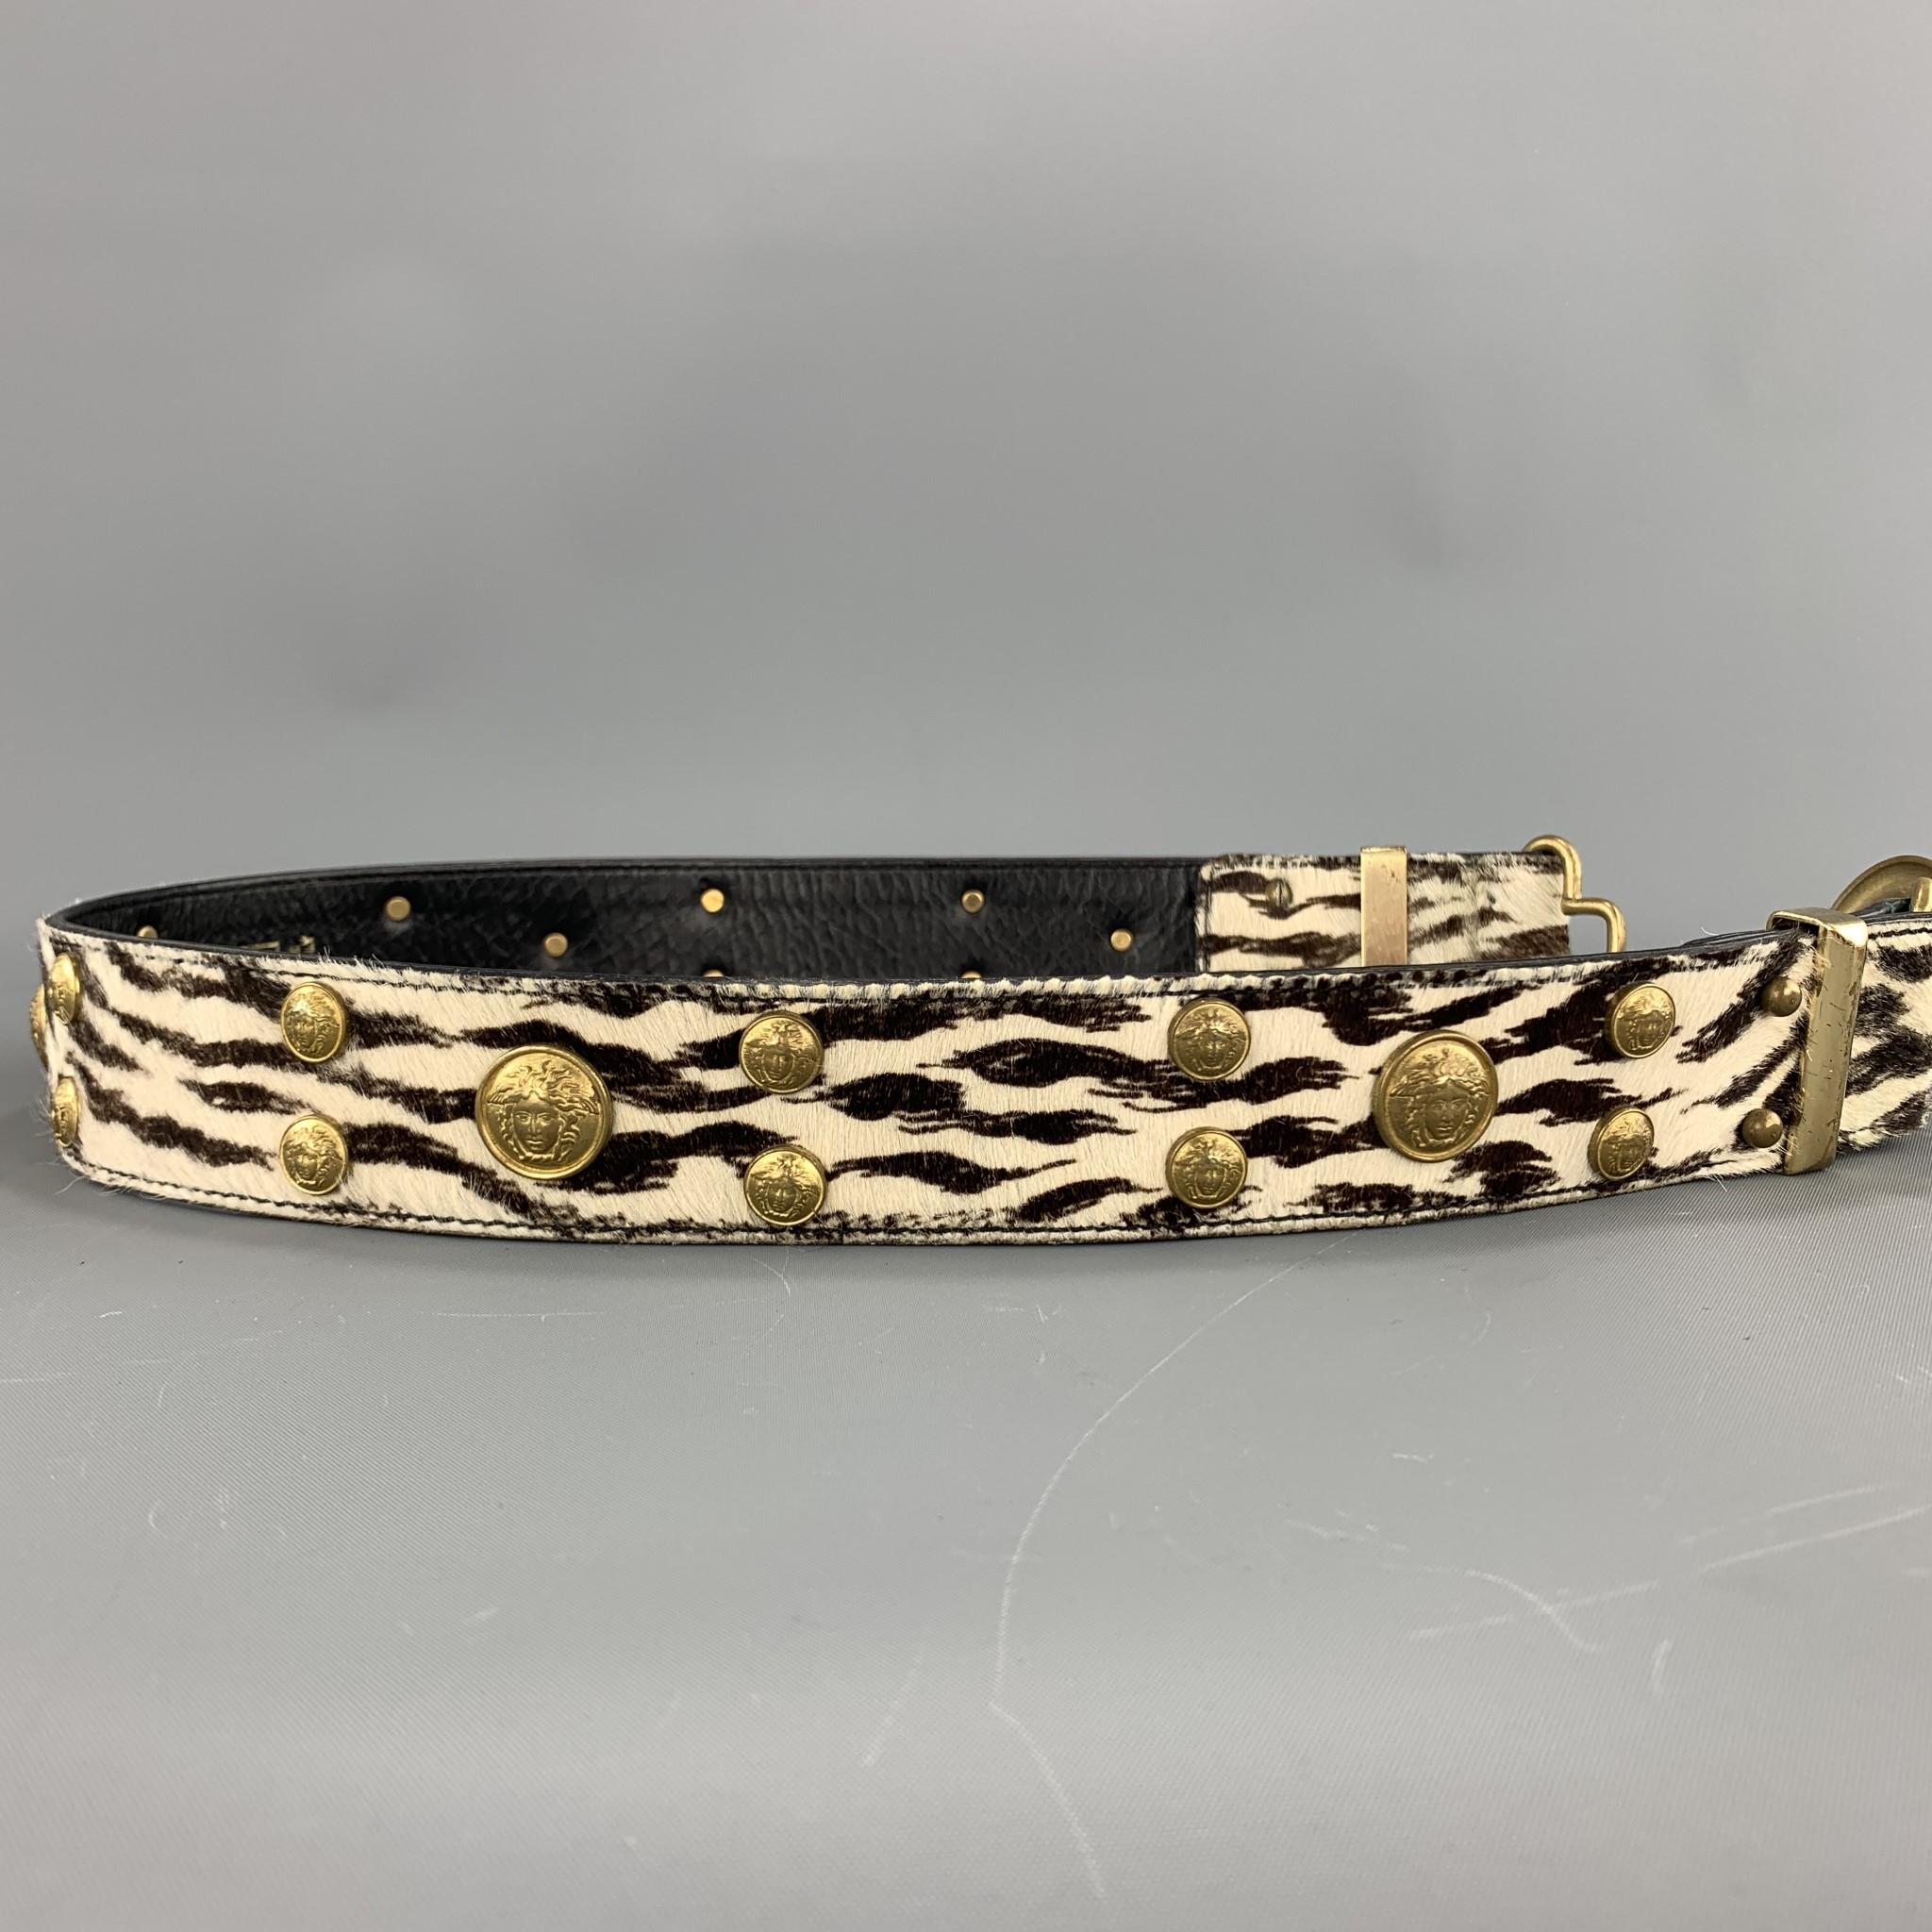 Black GIANNI VERSACE Studded Size 32 Beige & Brown Leather Pony Hair Belt